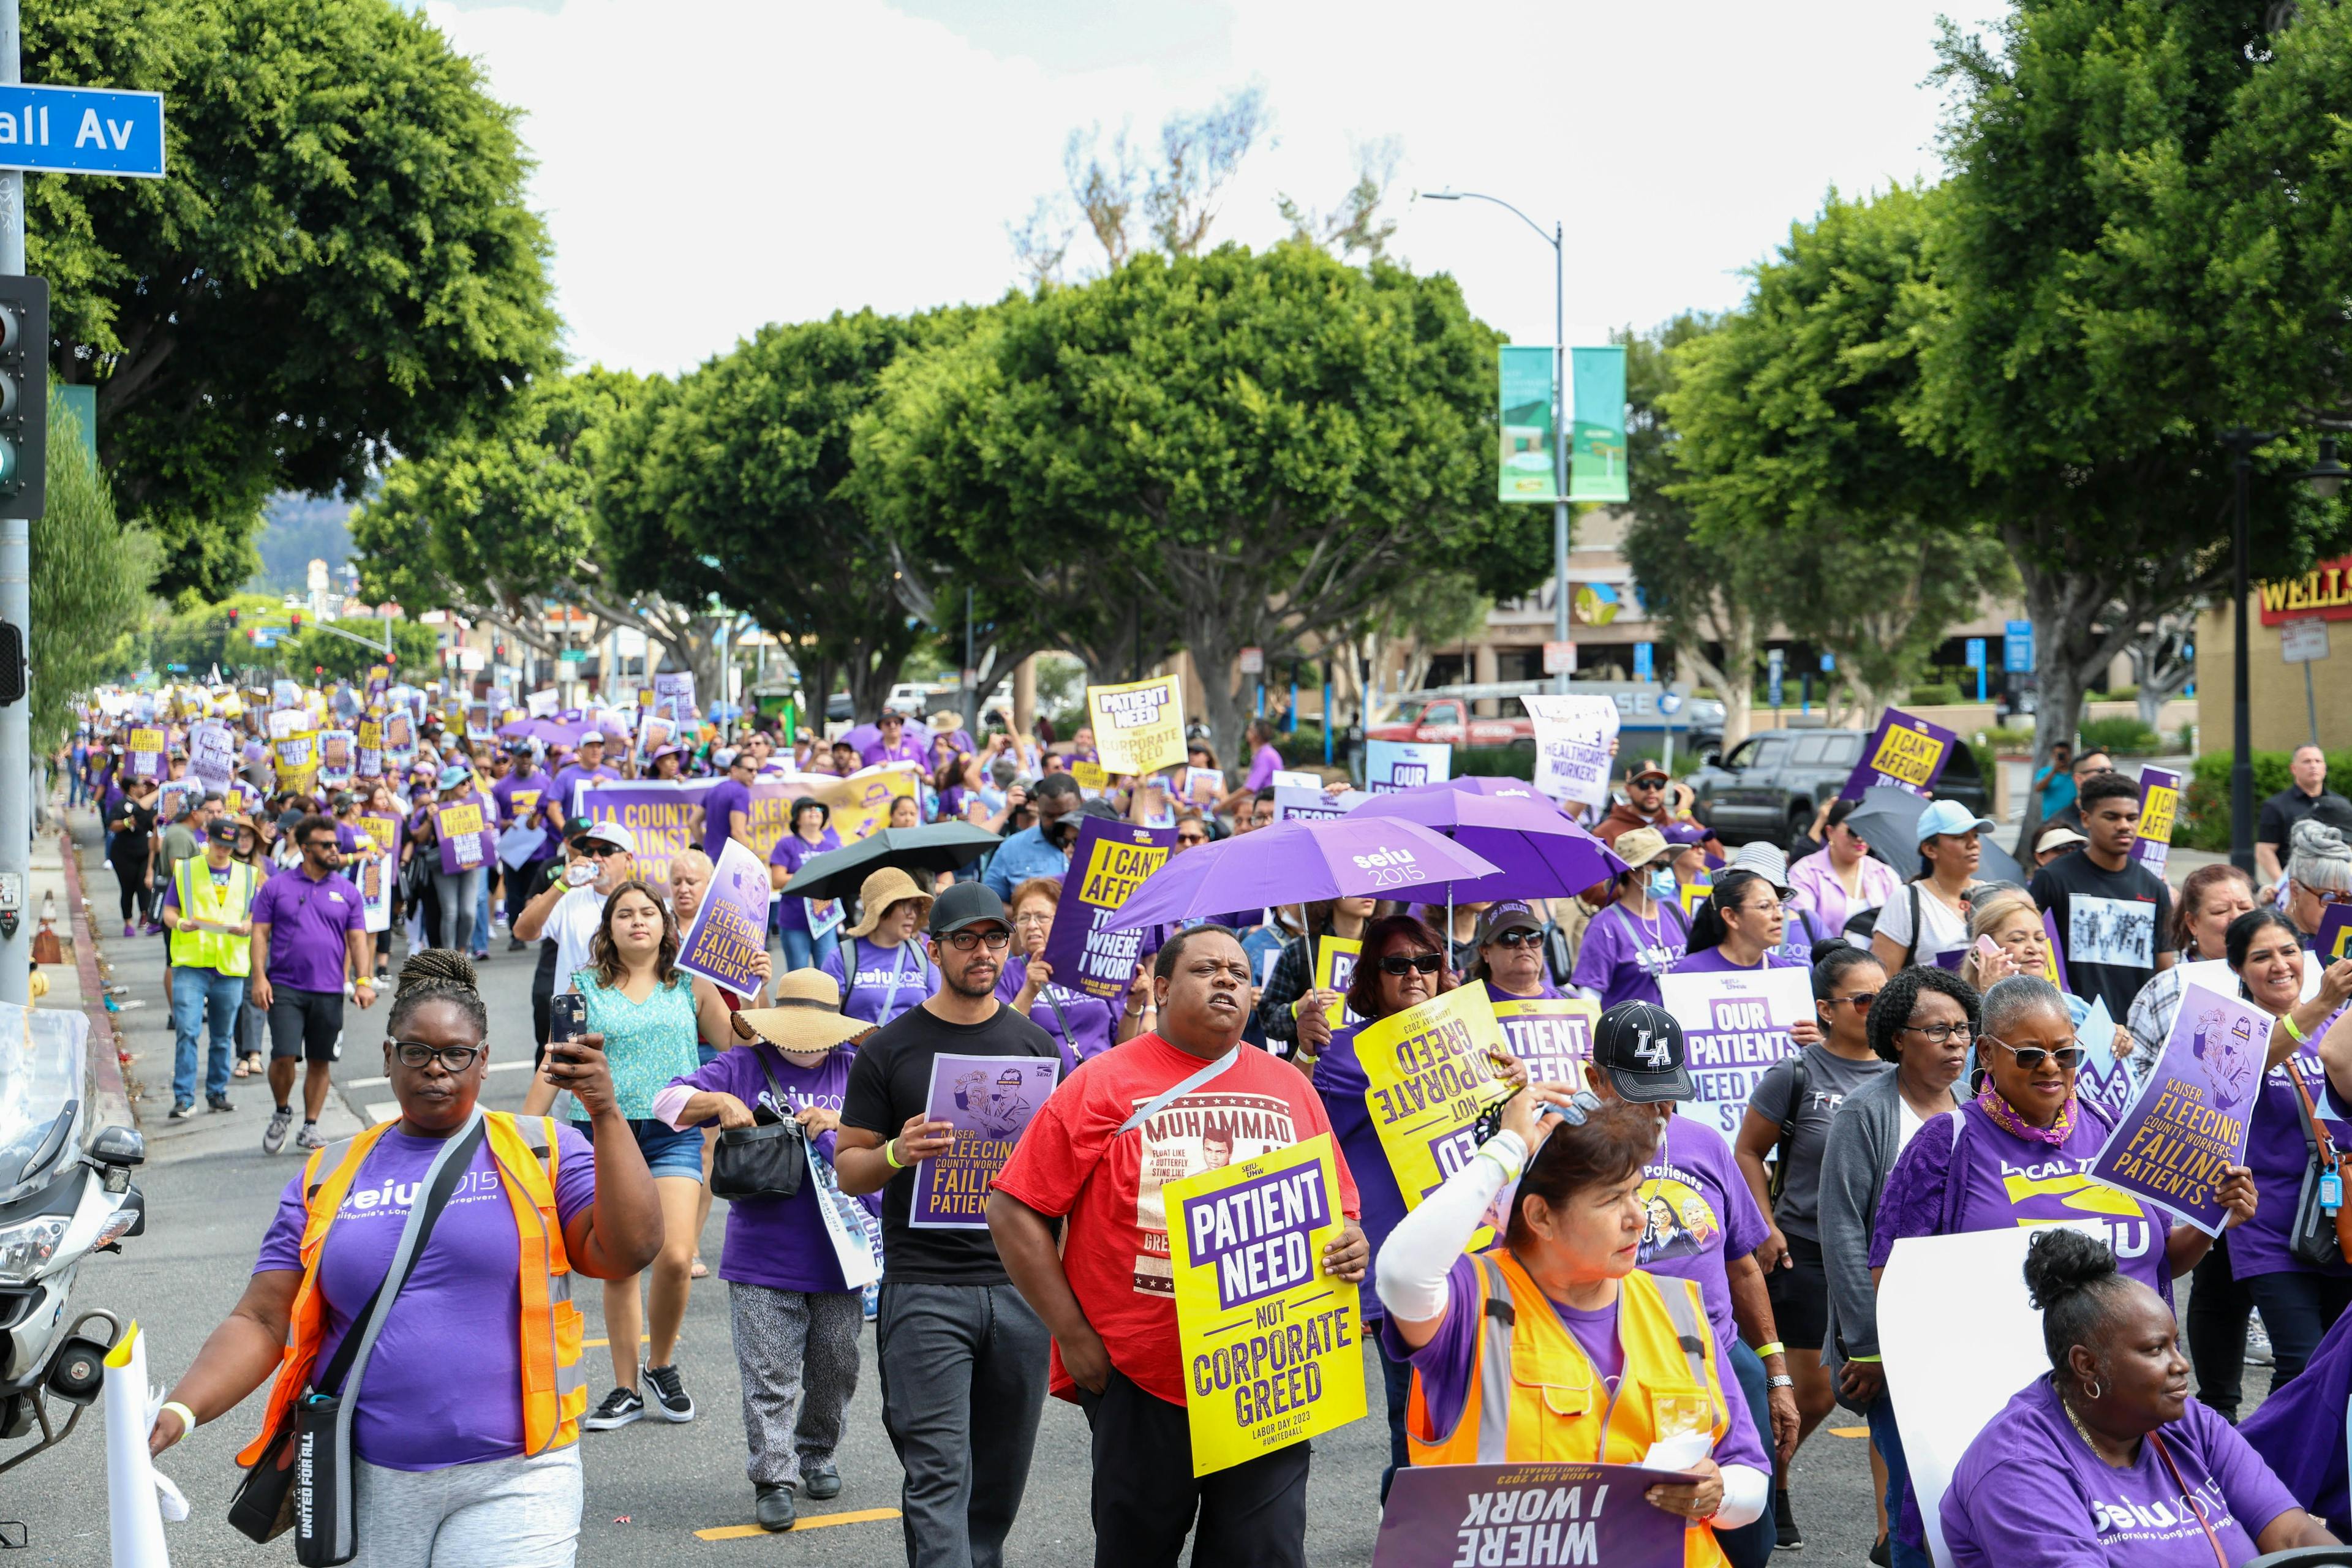 Union leaders say they have reached a tentative agreement with Kaiser Permanente on a new contract. The deal comes a week after more than 75,000 workers went on strike. (Photo: SEIU-UHW)